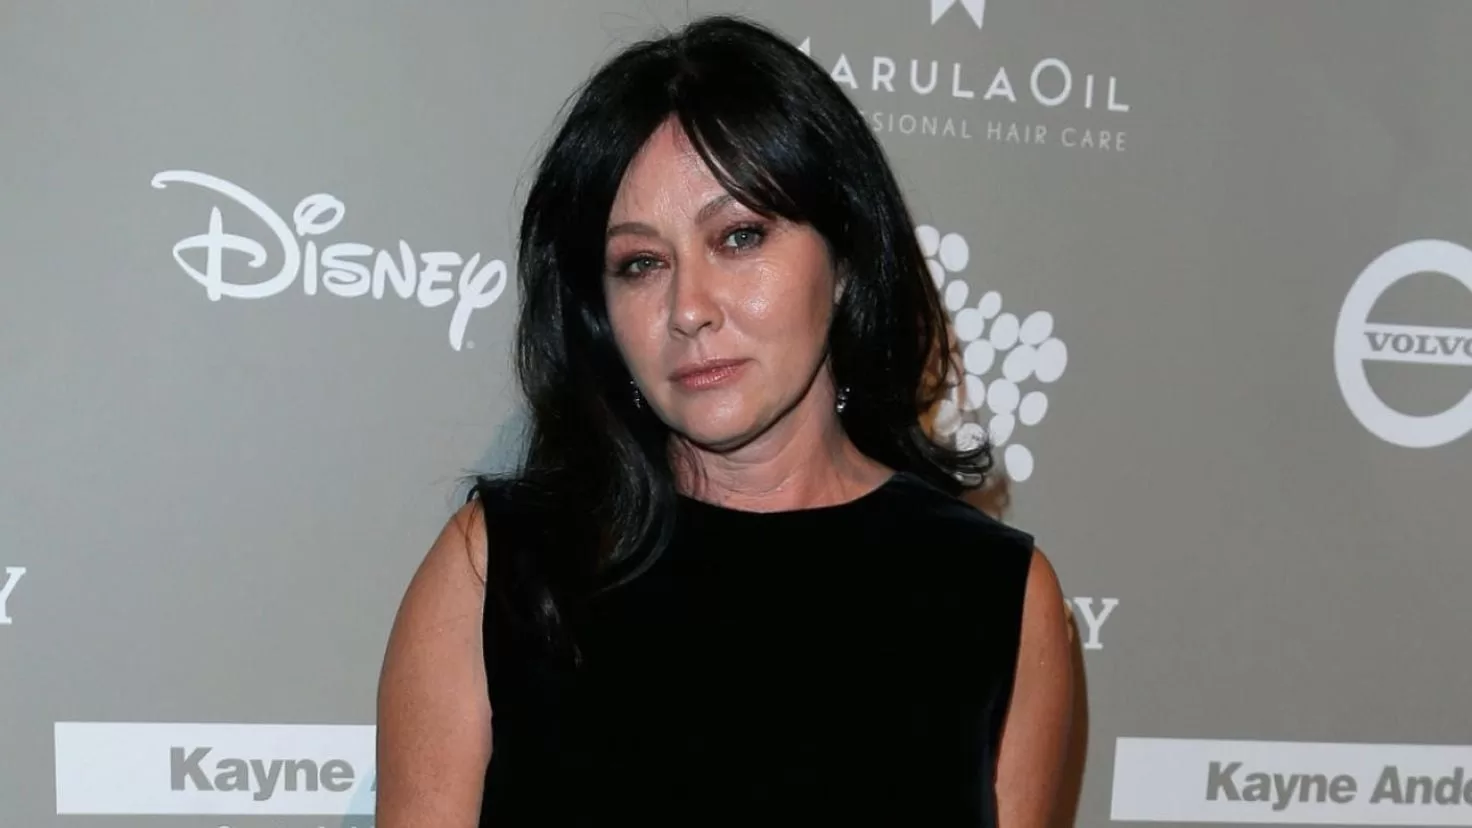 Shannen Doherty found out her husband was unfaithful just before she underwent brain surgery
